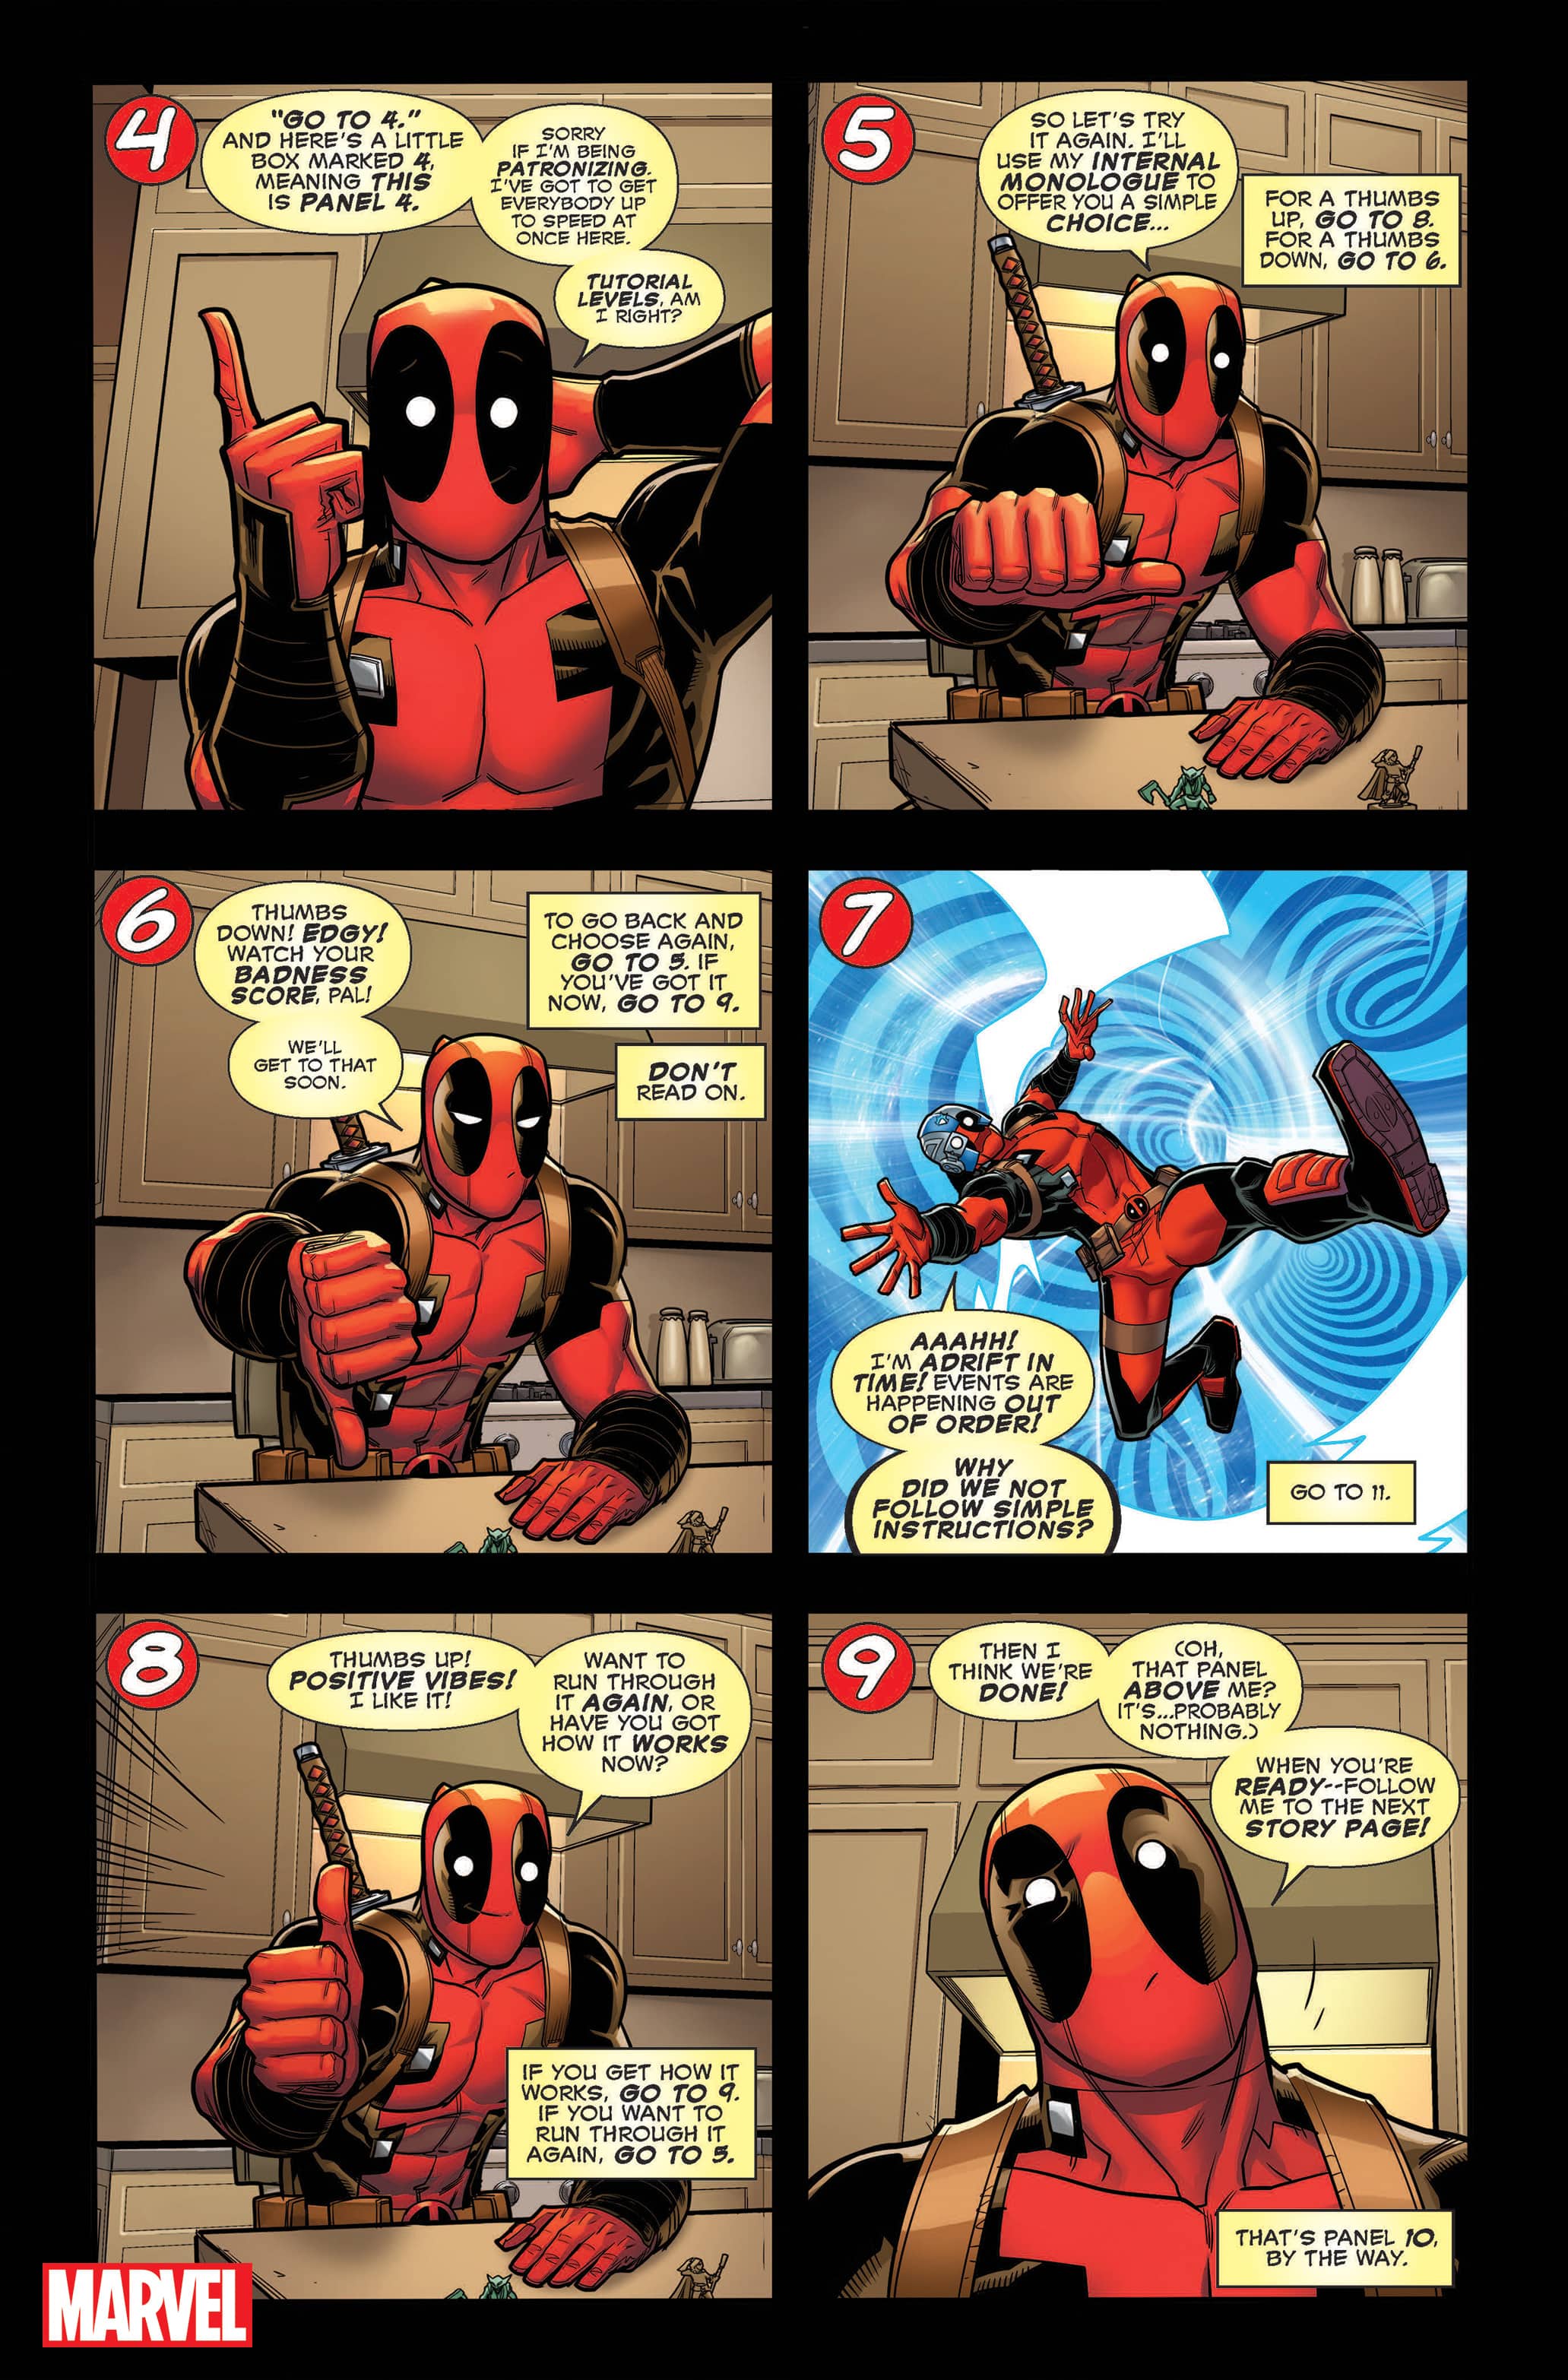 YOU_ARE_DEADPOOL_002